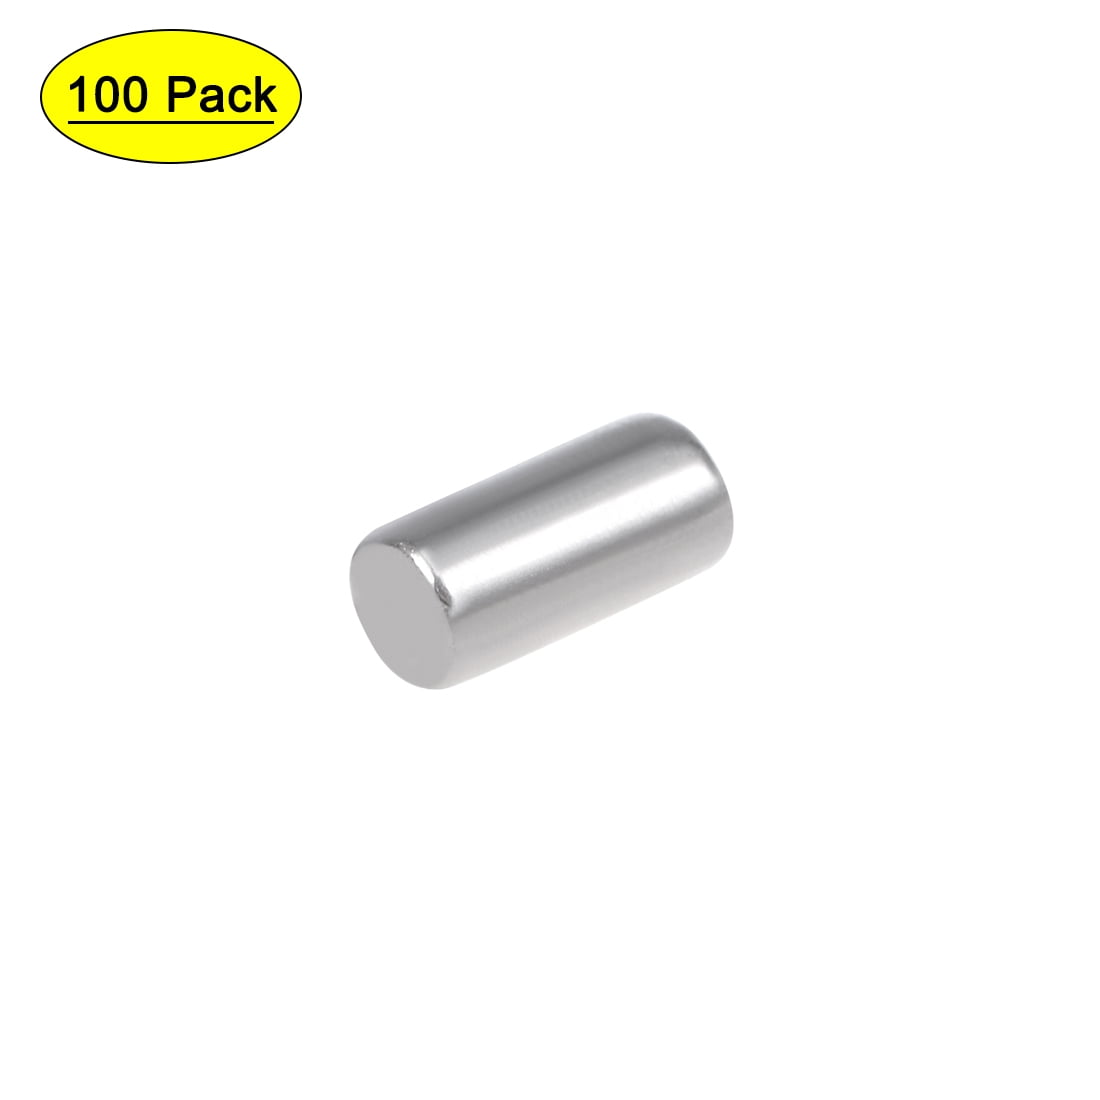 sourcing map 100Pcs 2mm x 22mm Dowel Pin 304 Stainless Steel Wood Bunk Bed Dowel 